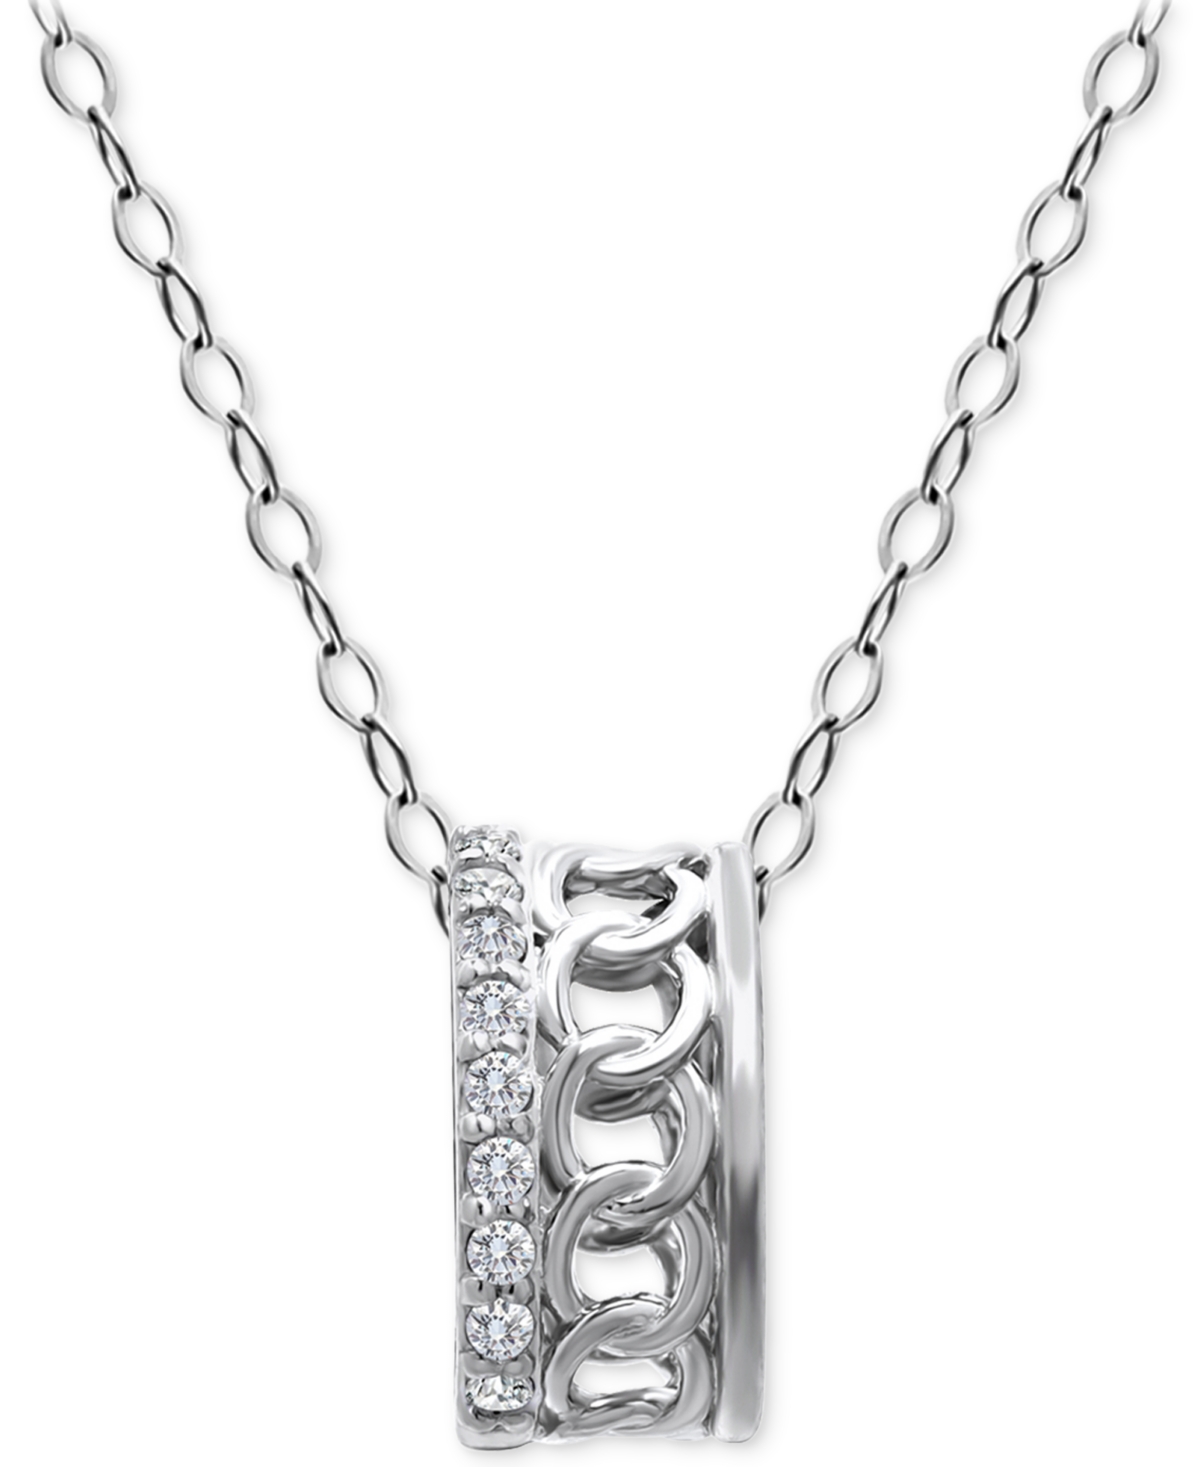 Giani Bernini Cubic Zirconia Open Link Rondelle Slide Pendant Necklace, 16" + 2" Extender, Created For Macy's In Silver